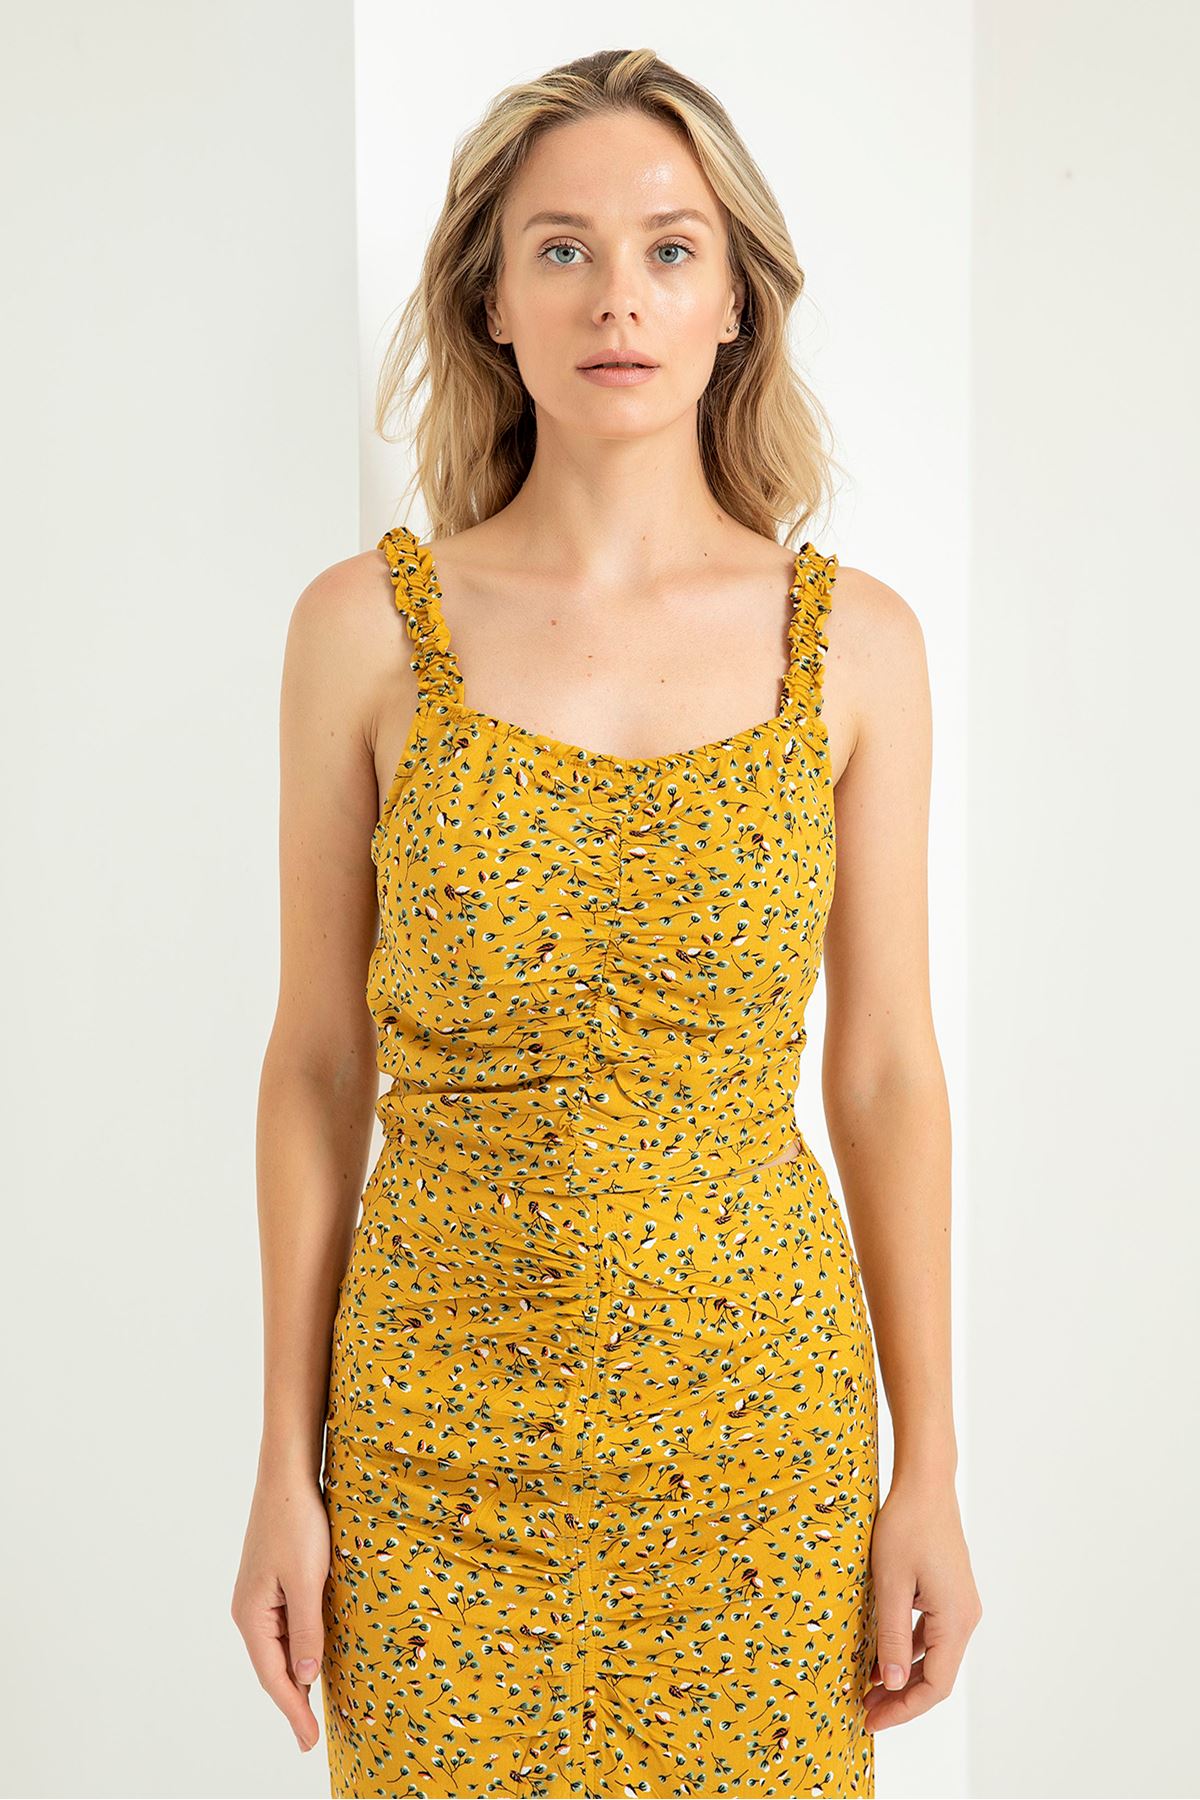 Printed Fabric Square Neckline Floral Pattern With Elastic Blouse - Mustard